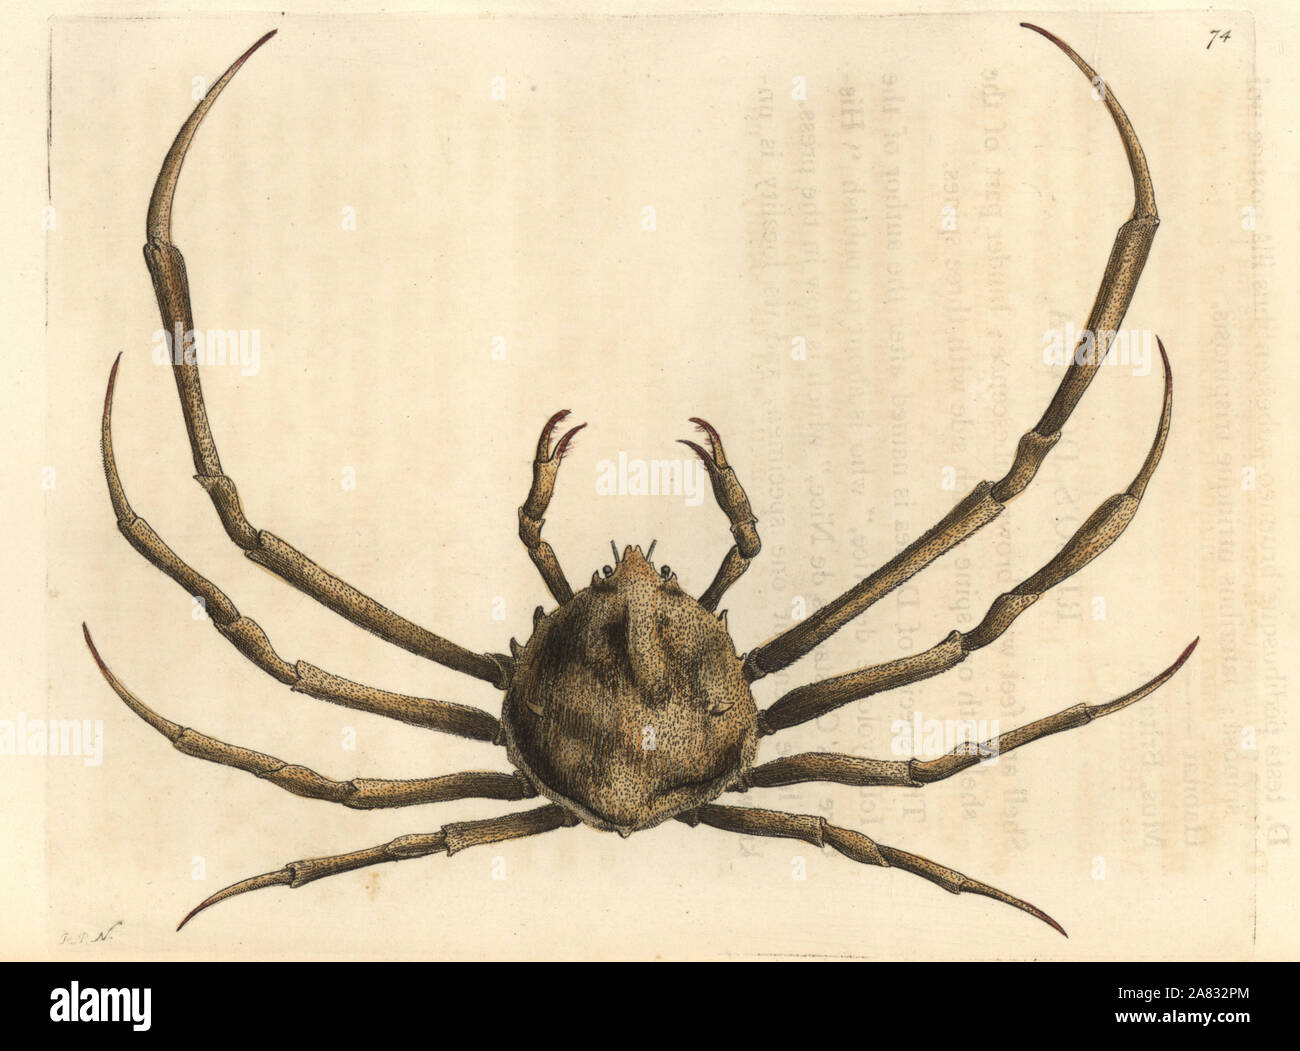 Risso's doclea crab, Doclea rissonii. Handcoloured copperplate engraving drawn and engraved by Richard Polydore Nodder from William Elford Leach's Zoological Miscellany, McMillan, London, 1815. Stock Photo